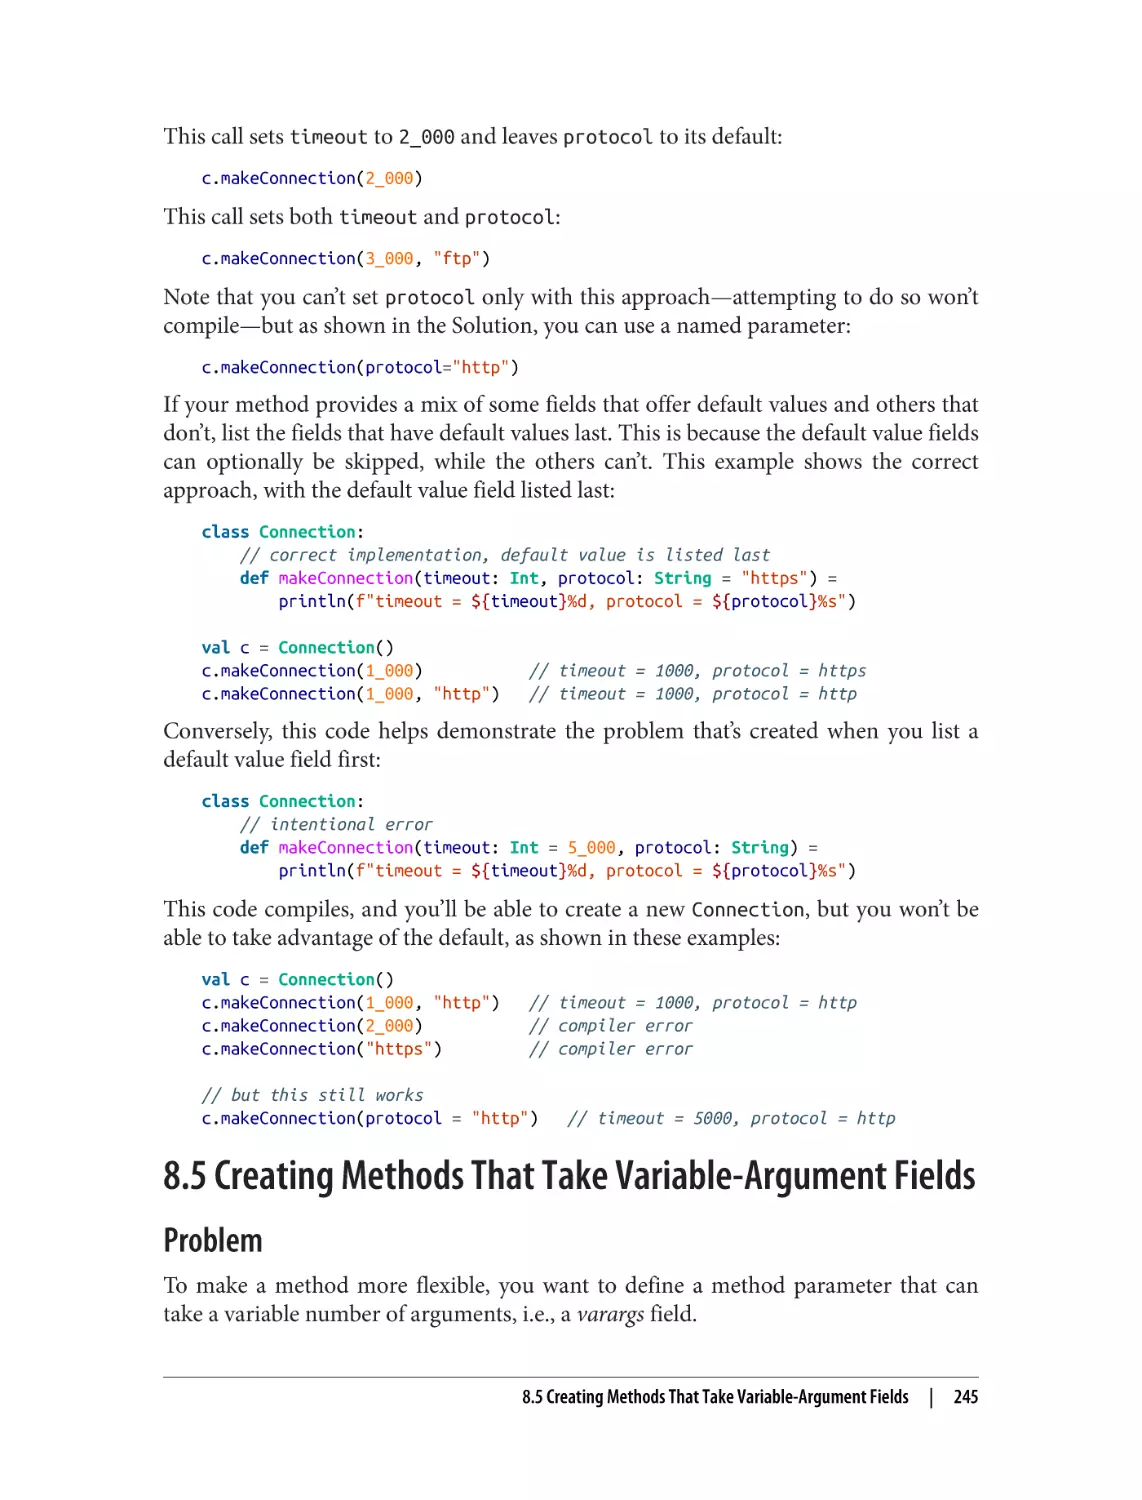 8.5 Creating Methods That Take Variable-Argument Fields
Problem